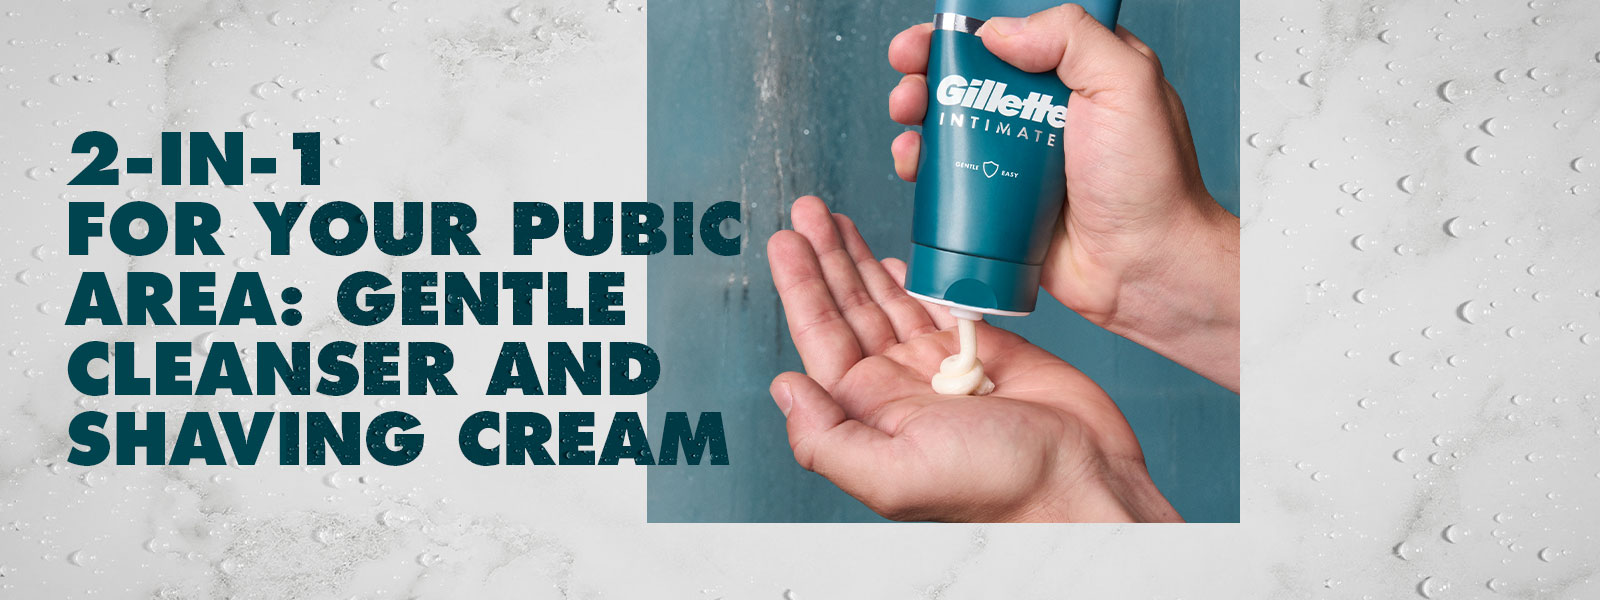 2-in-1 for your pubic area: gentle cleanser and shaving cream.